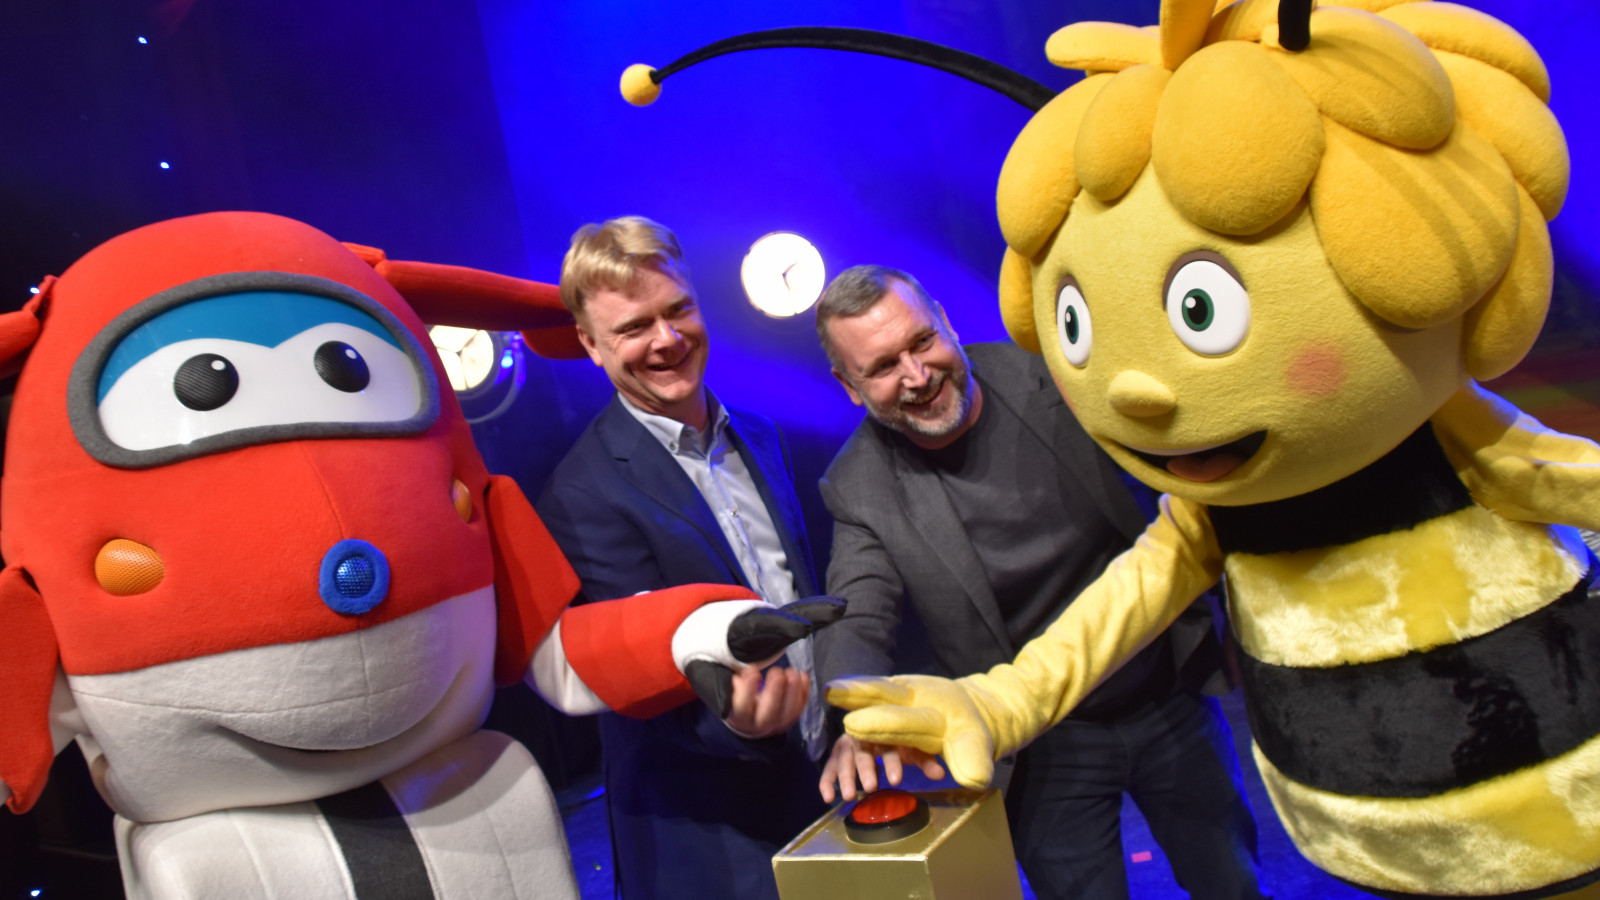 VIDEO: New theme park Majaland Warsaw officially opened